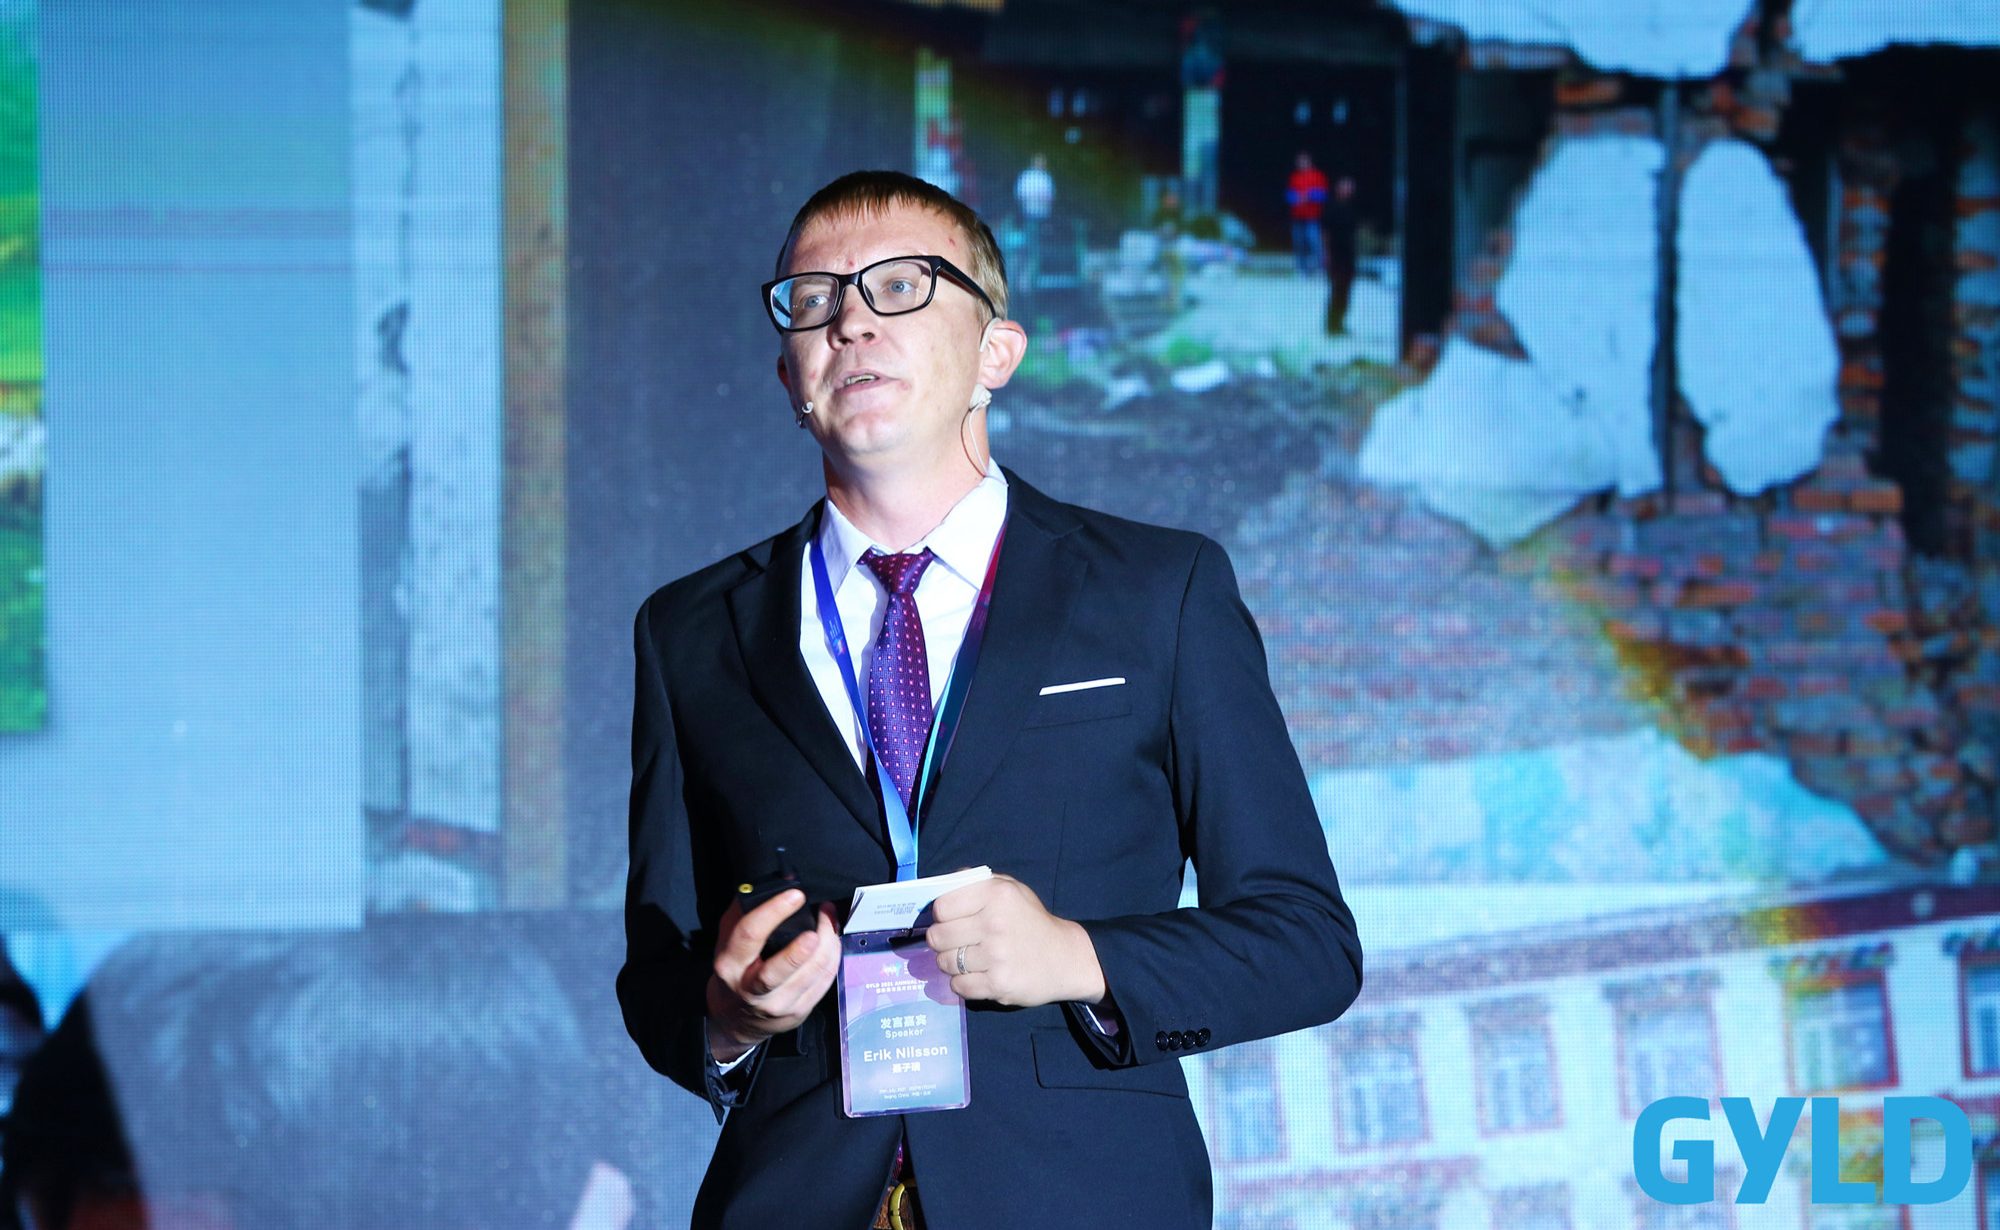 【GYLD Talk】Erik Nilsson: China’s poverty alleviation is not just a Chinese story, but a human story